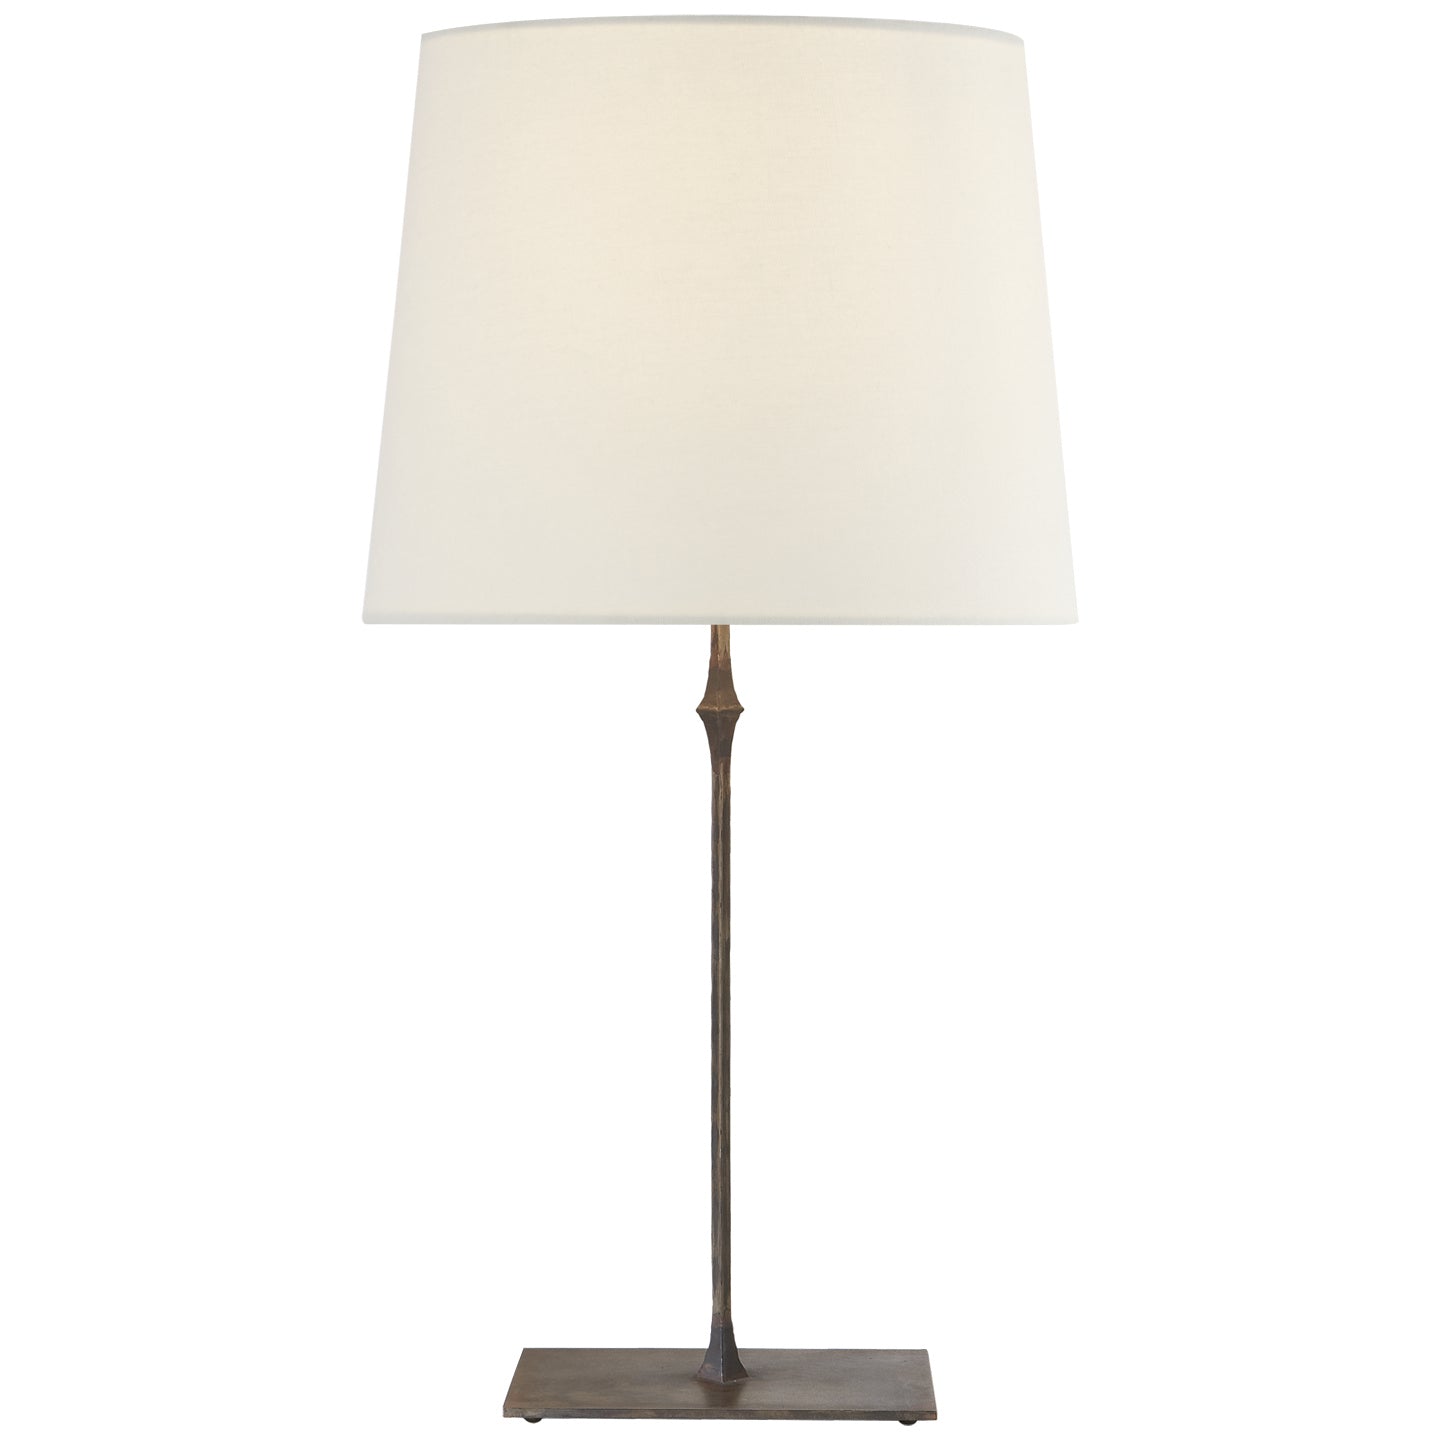 Load image into Gallery viewer, Visual Comfort Signature - S 3401AI-L - One Light Table Lamp - dauphine - Aged Iron
